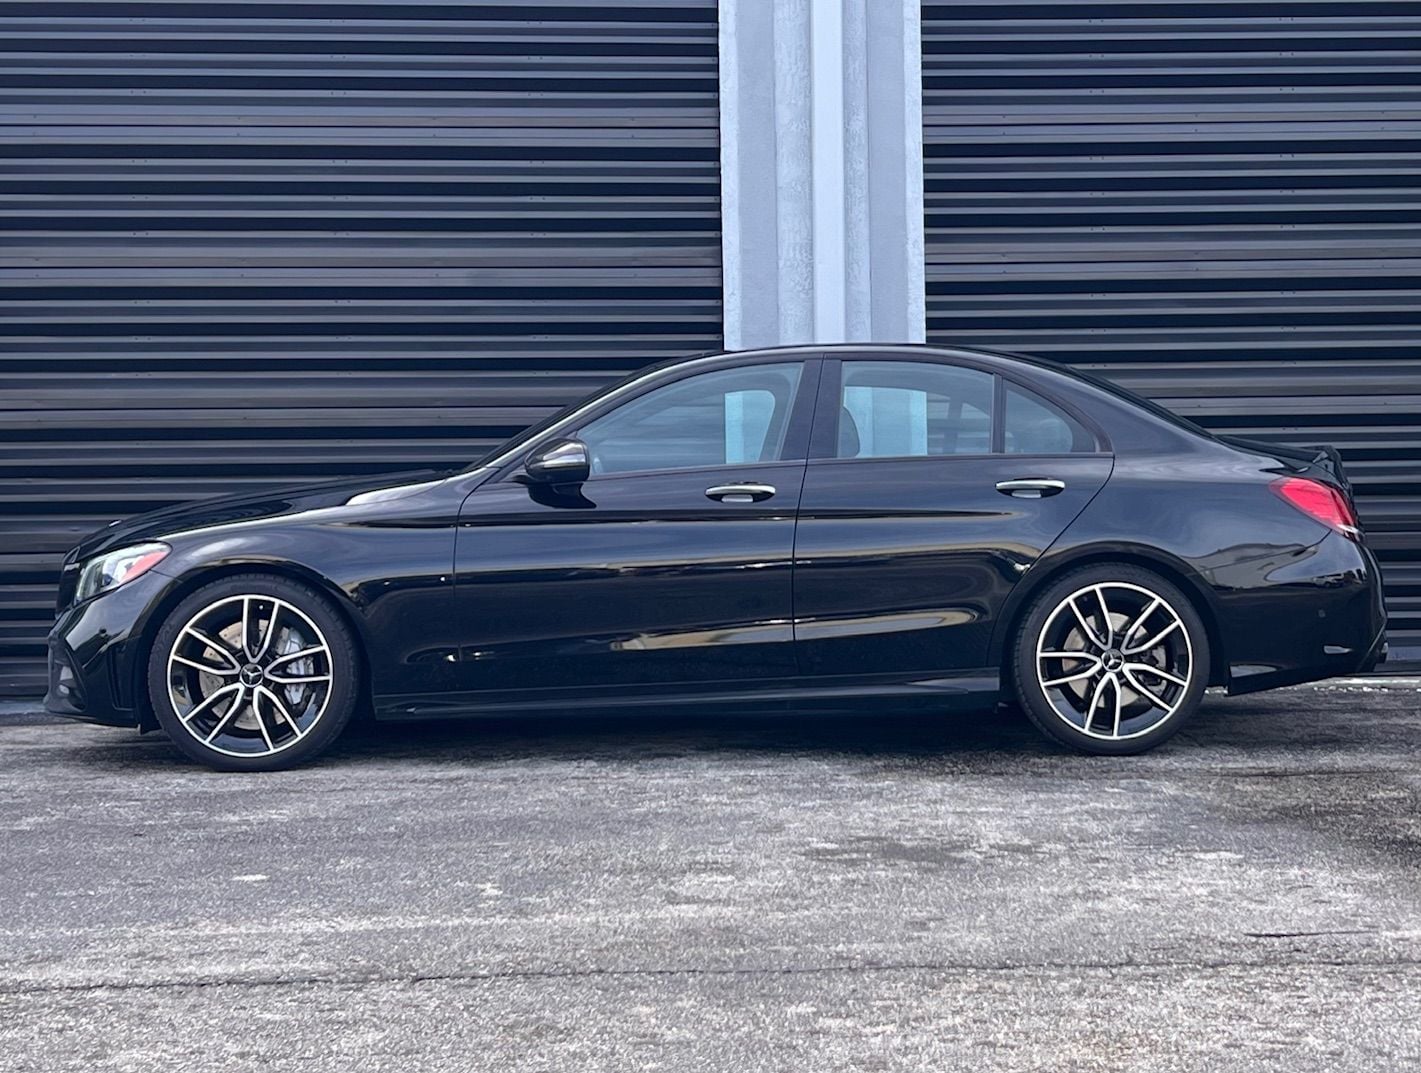 Wheels and Tires/Axles - WANTED: Wheels for 2019 C43 - New or Used - 2019 Mercedes-Benz C43 AMG - Miami, FL 33186, United States